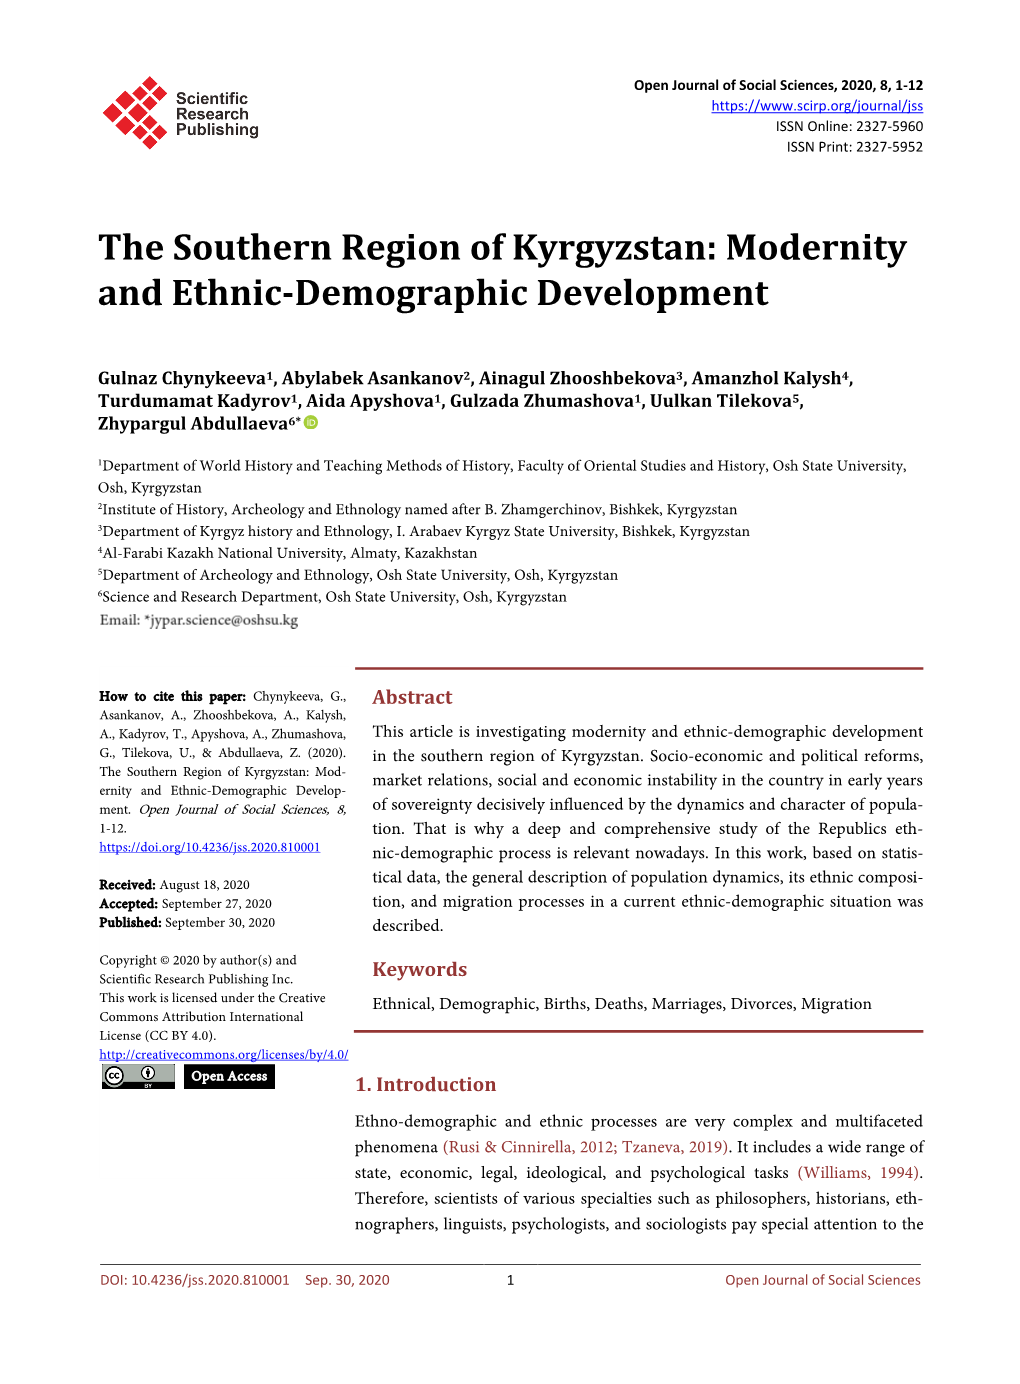 The Southern Region of Kyrgyzstan: Modernity and Ethnic-Demographic Development